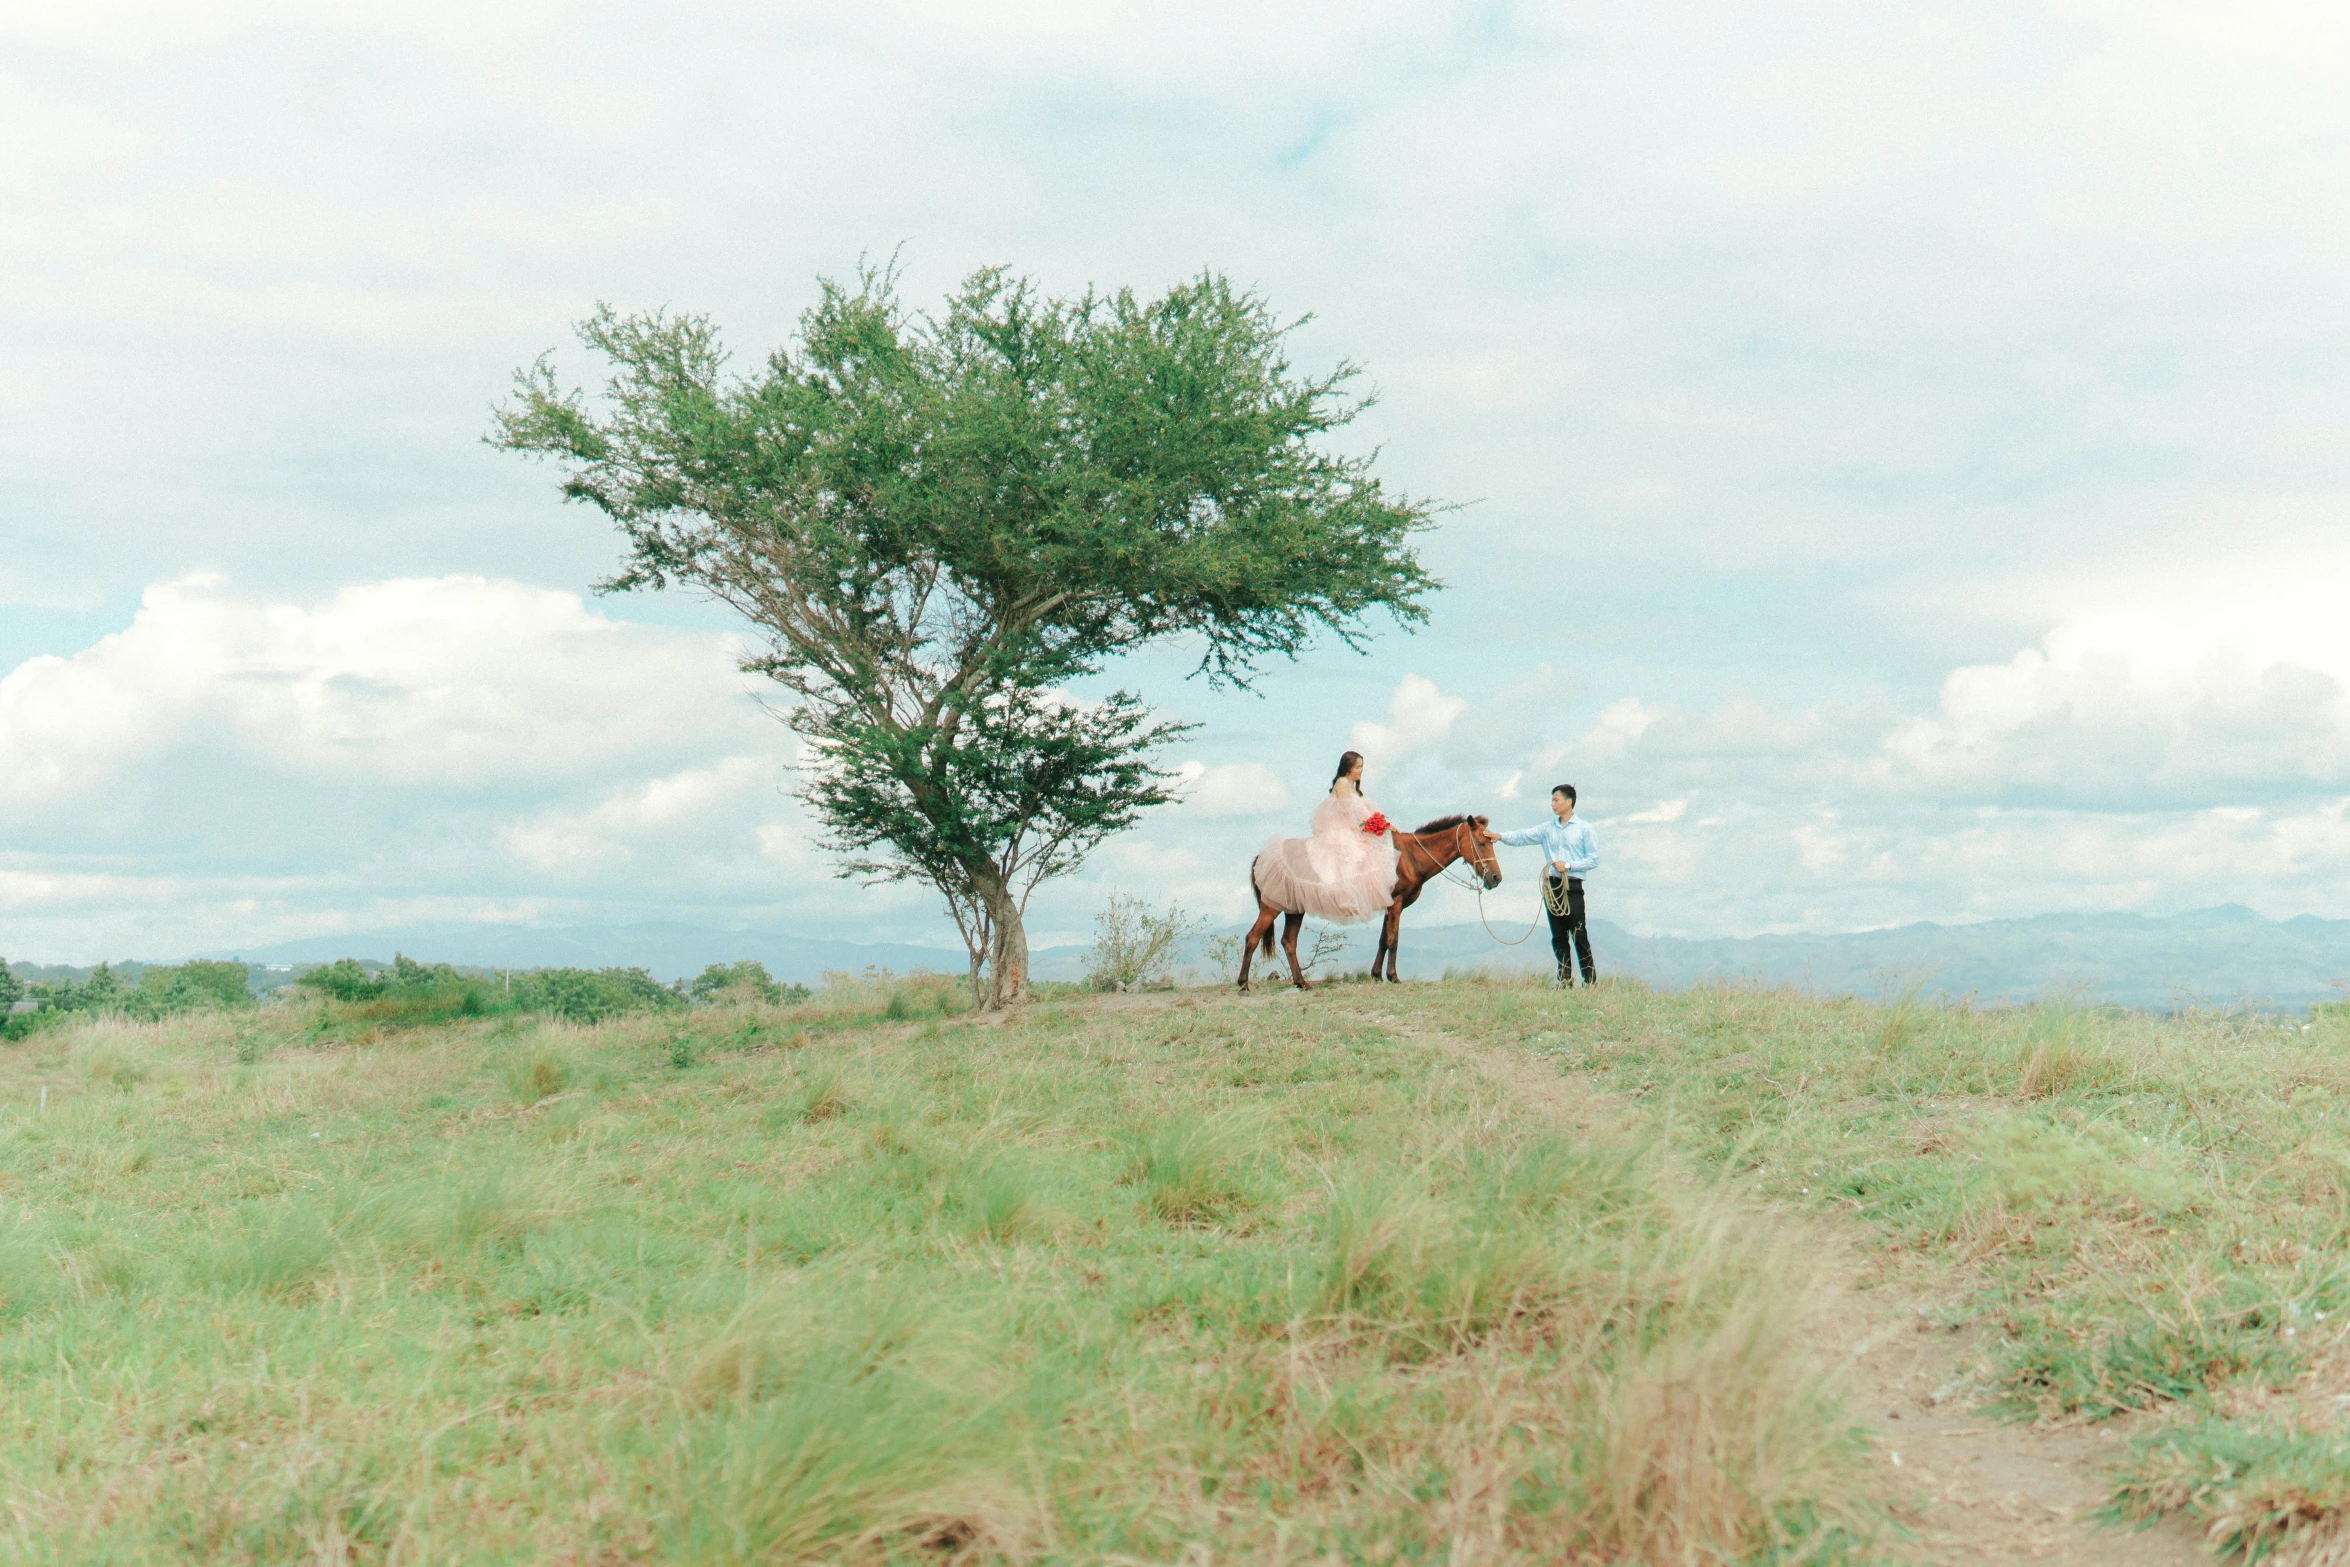 a person and their horse standing under a tree on a grassy hill